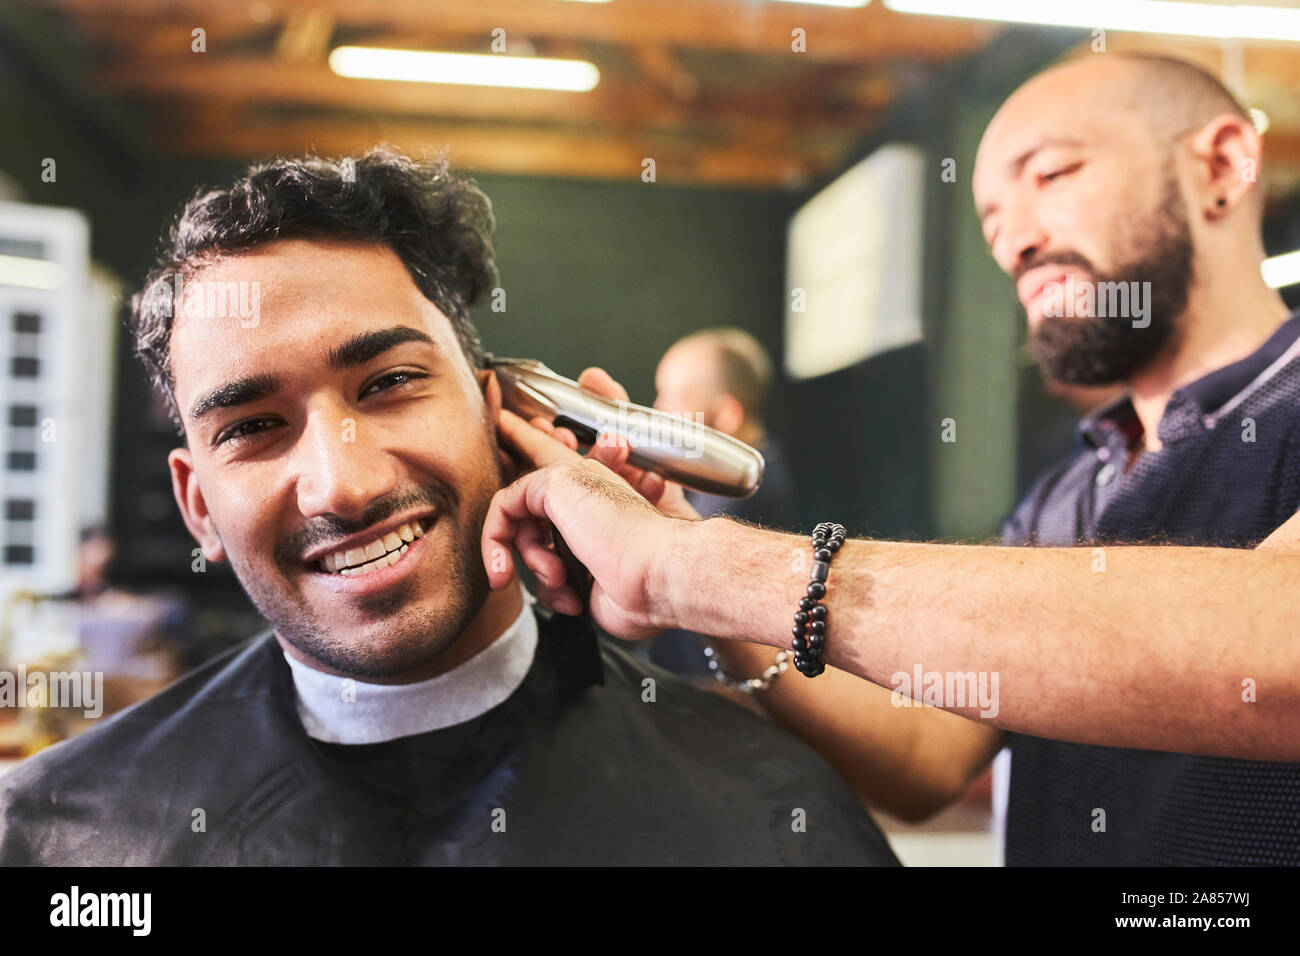 Portrait smiling young man receiving haircut at barbershop Stock Photo